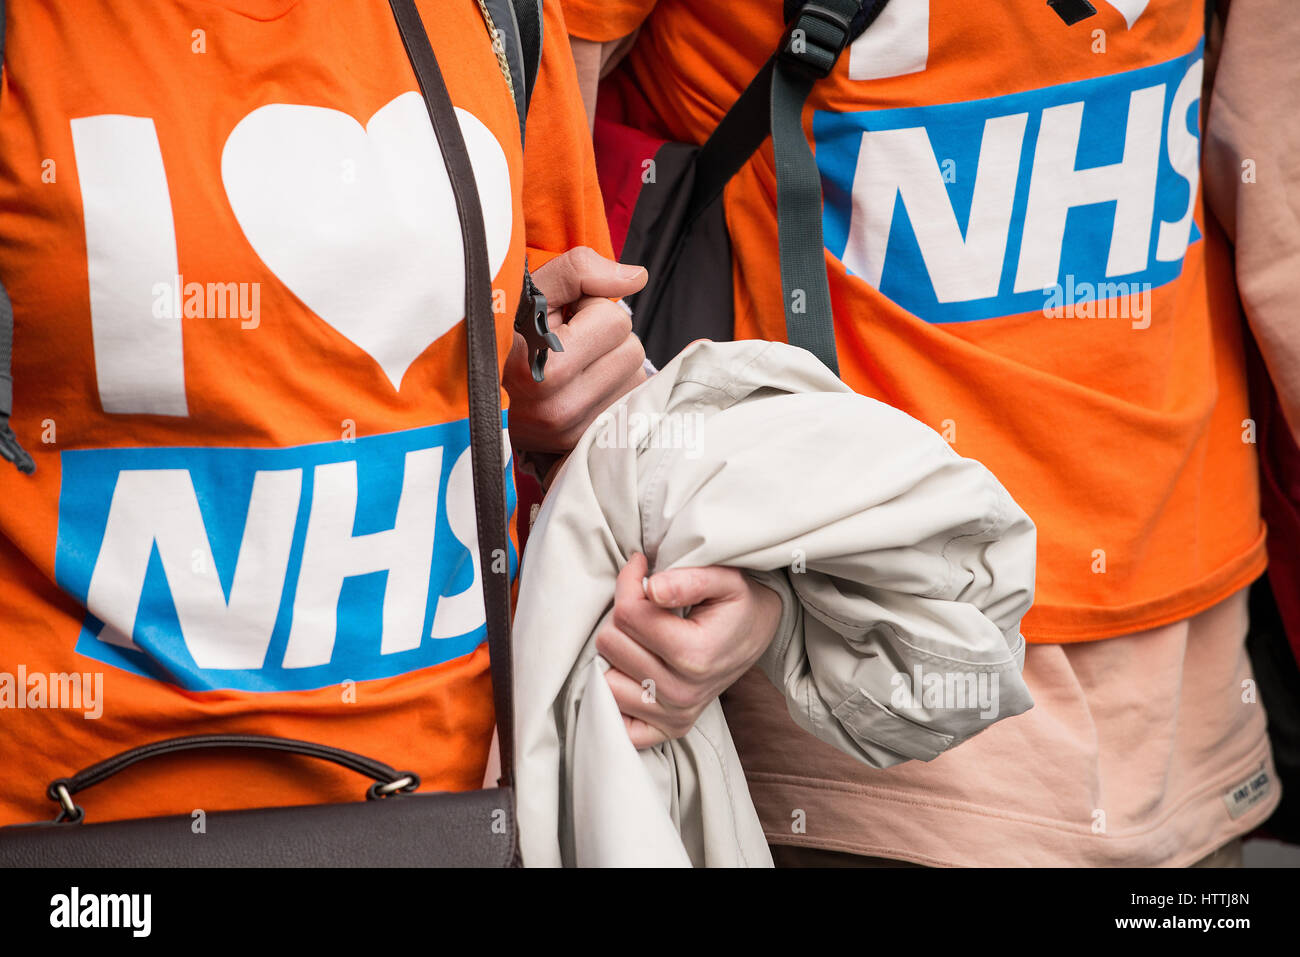 # OUR NHS rally - Thousands turn out for the national demonstration in London, to defend the NHS against government cuts, closures and privatisation. Stock Photo